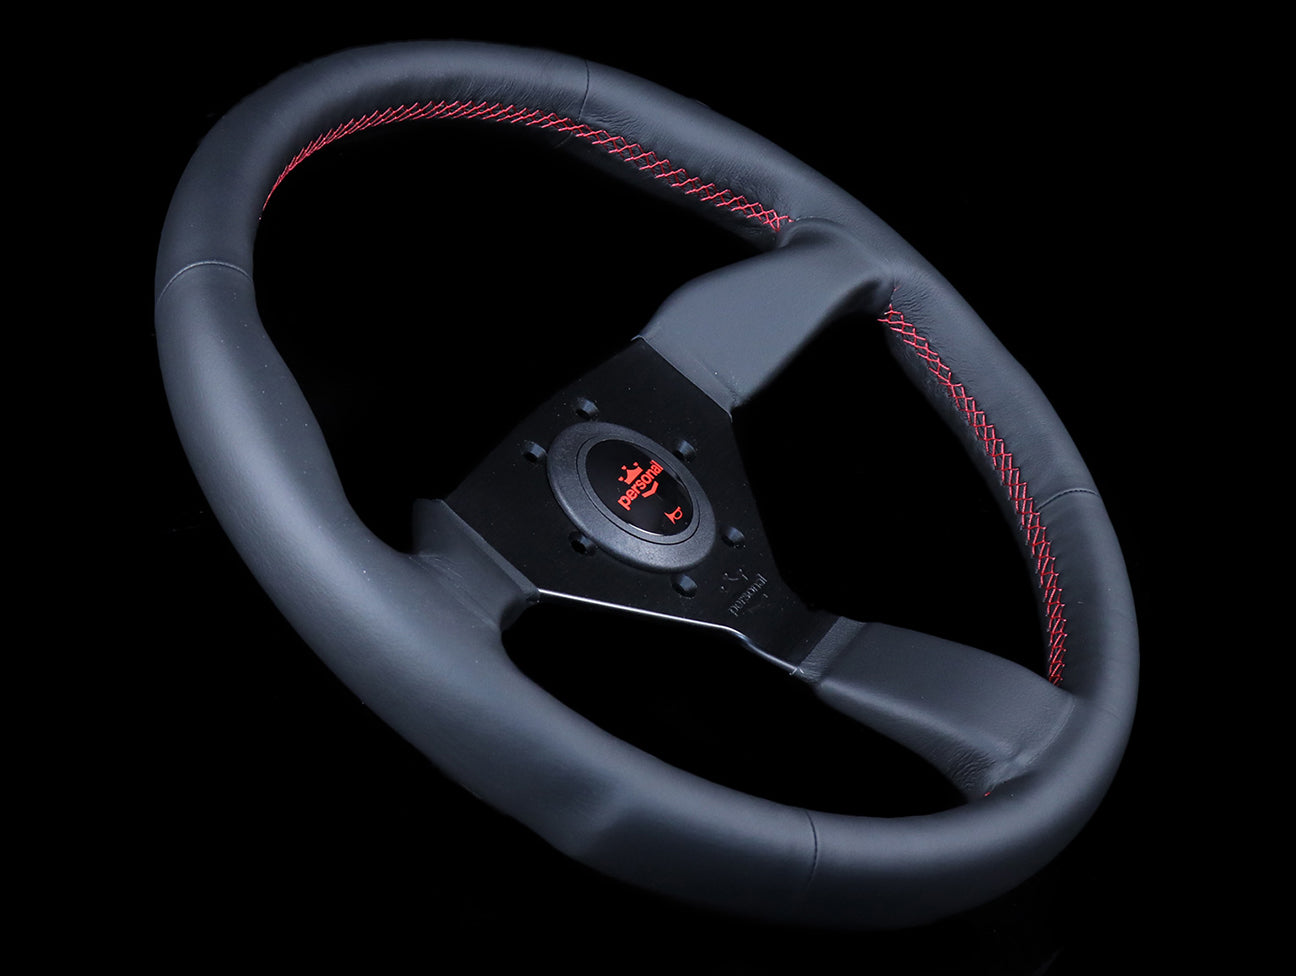 Personal Neo Grinta 330mm Steering Wheel - Black Leather / Red Stitch